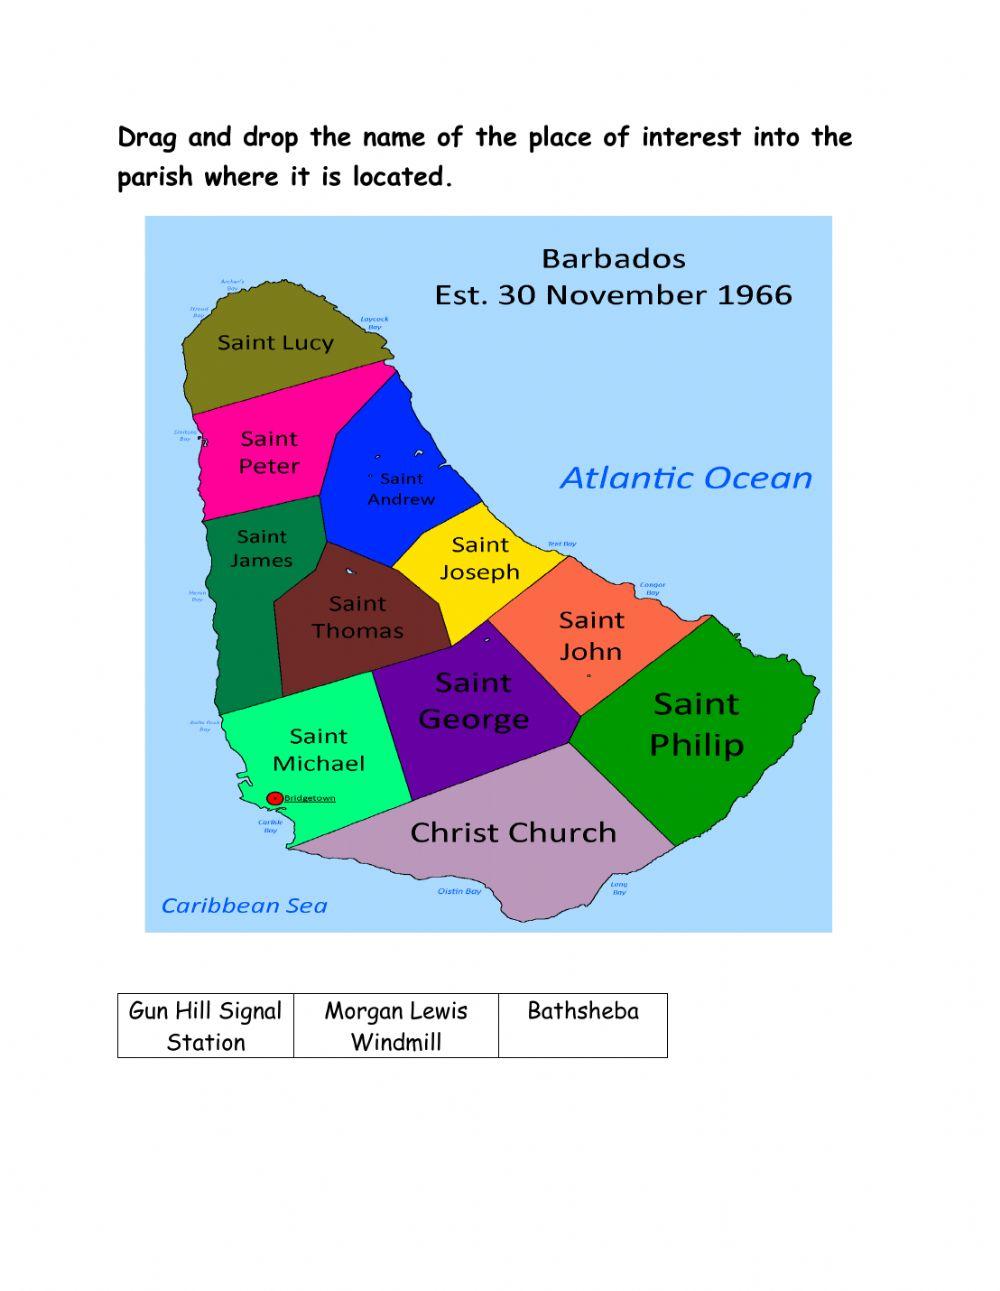 Places of Interest in Barbados